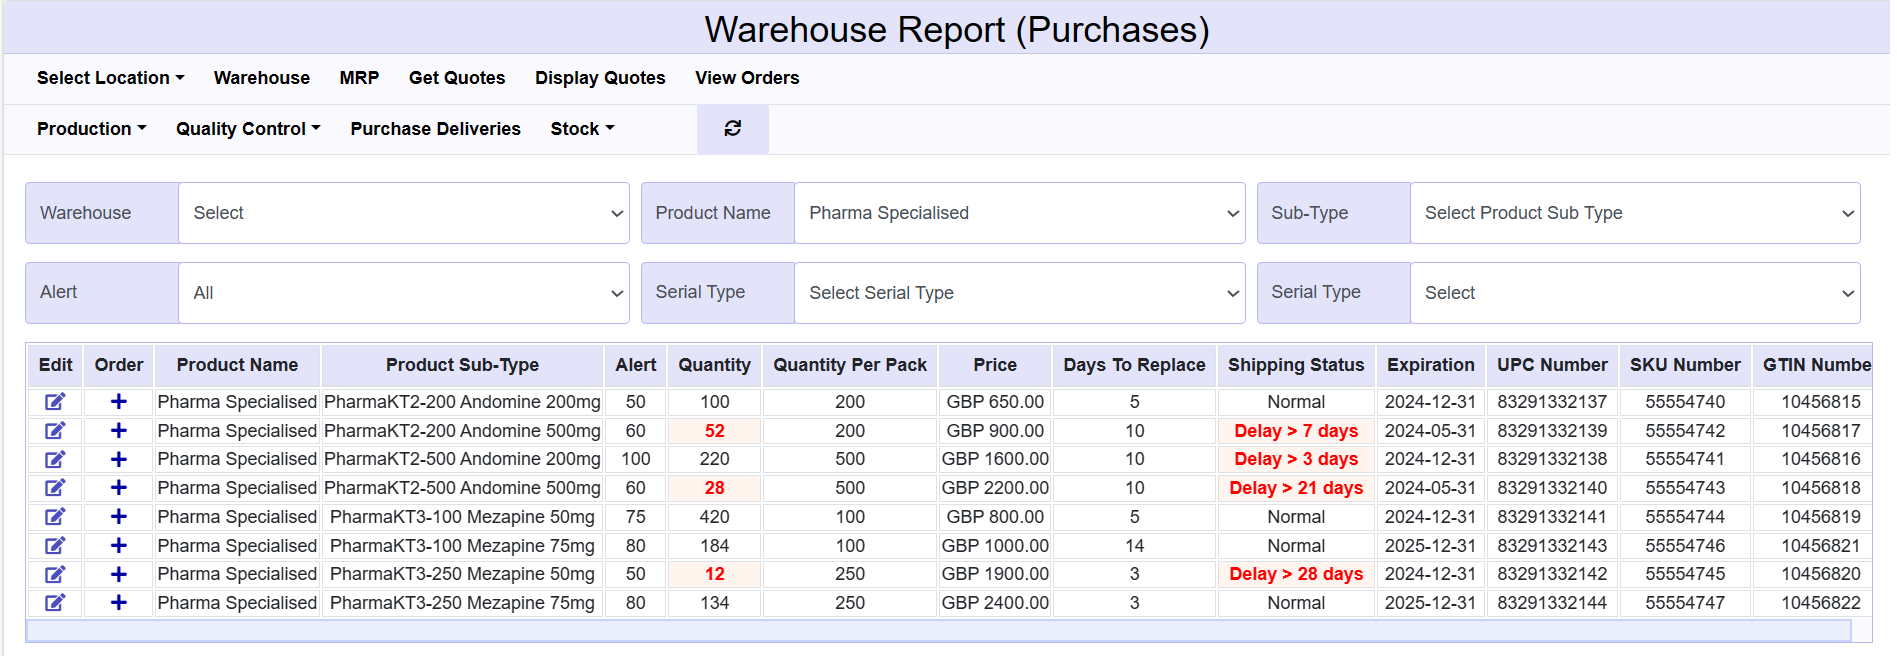 ecommerce-warehouse-report-purchases